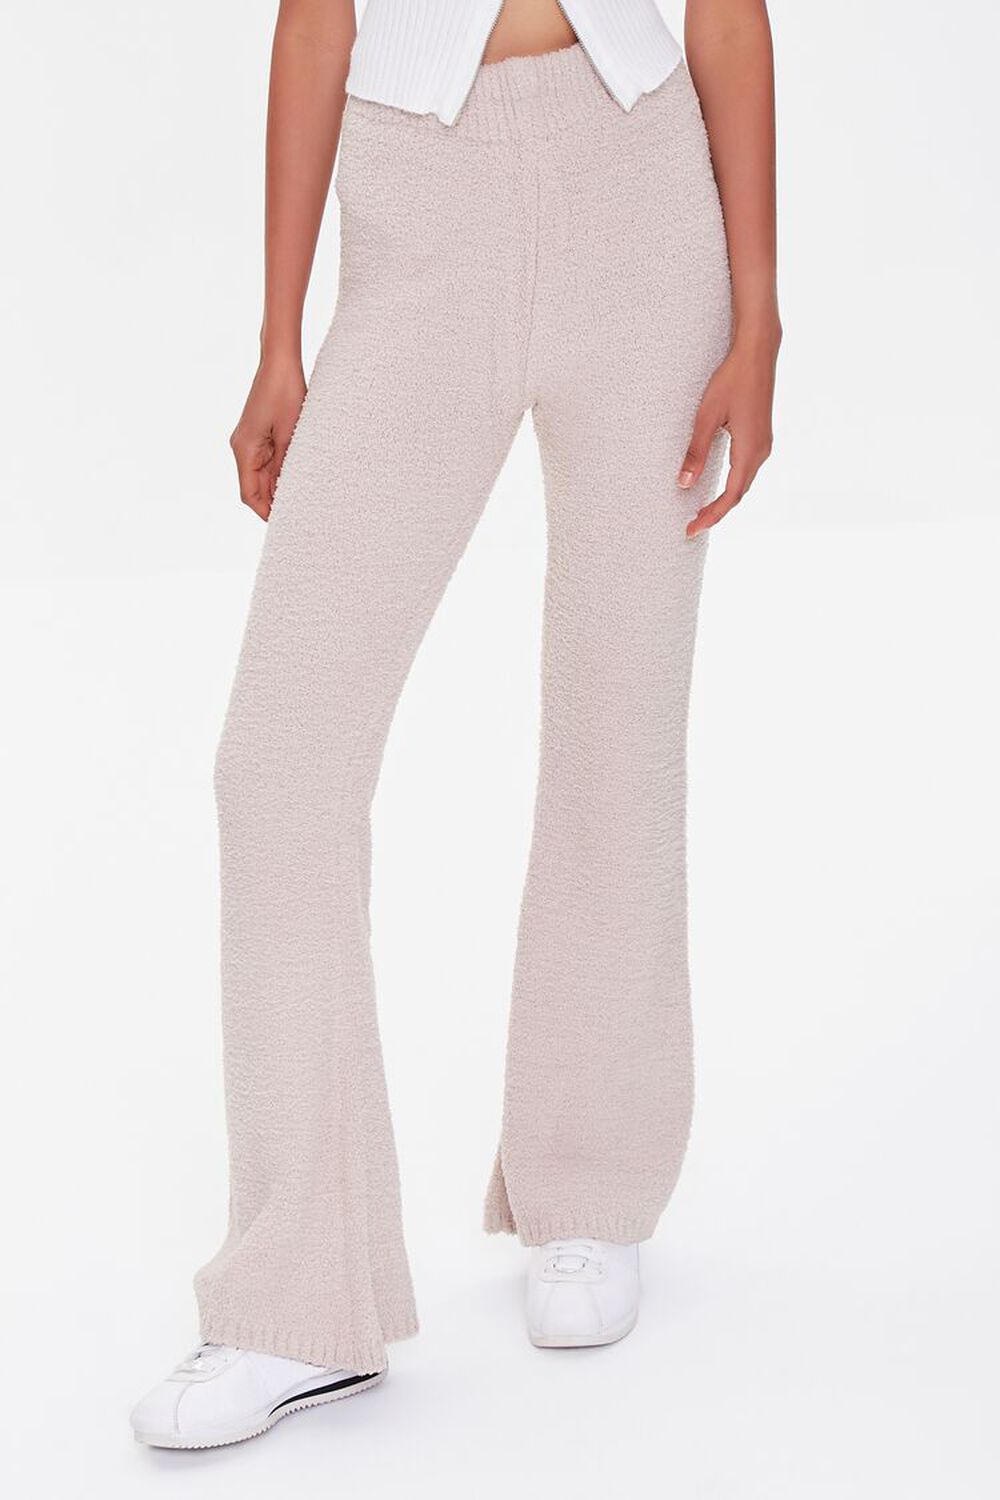 TAUPE High-Rise Flare Pants, image 2